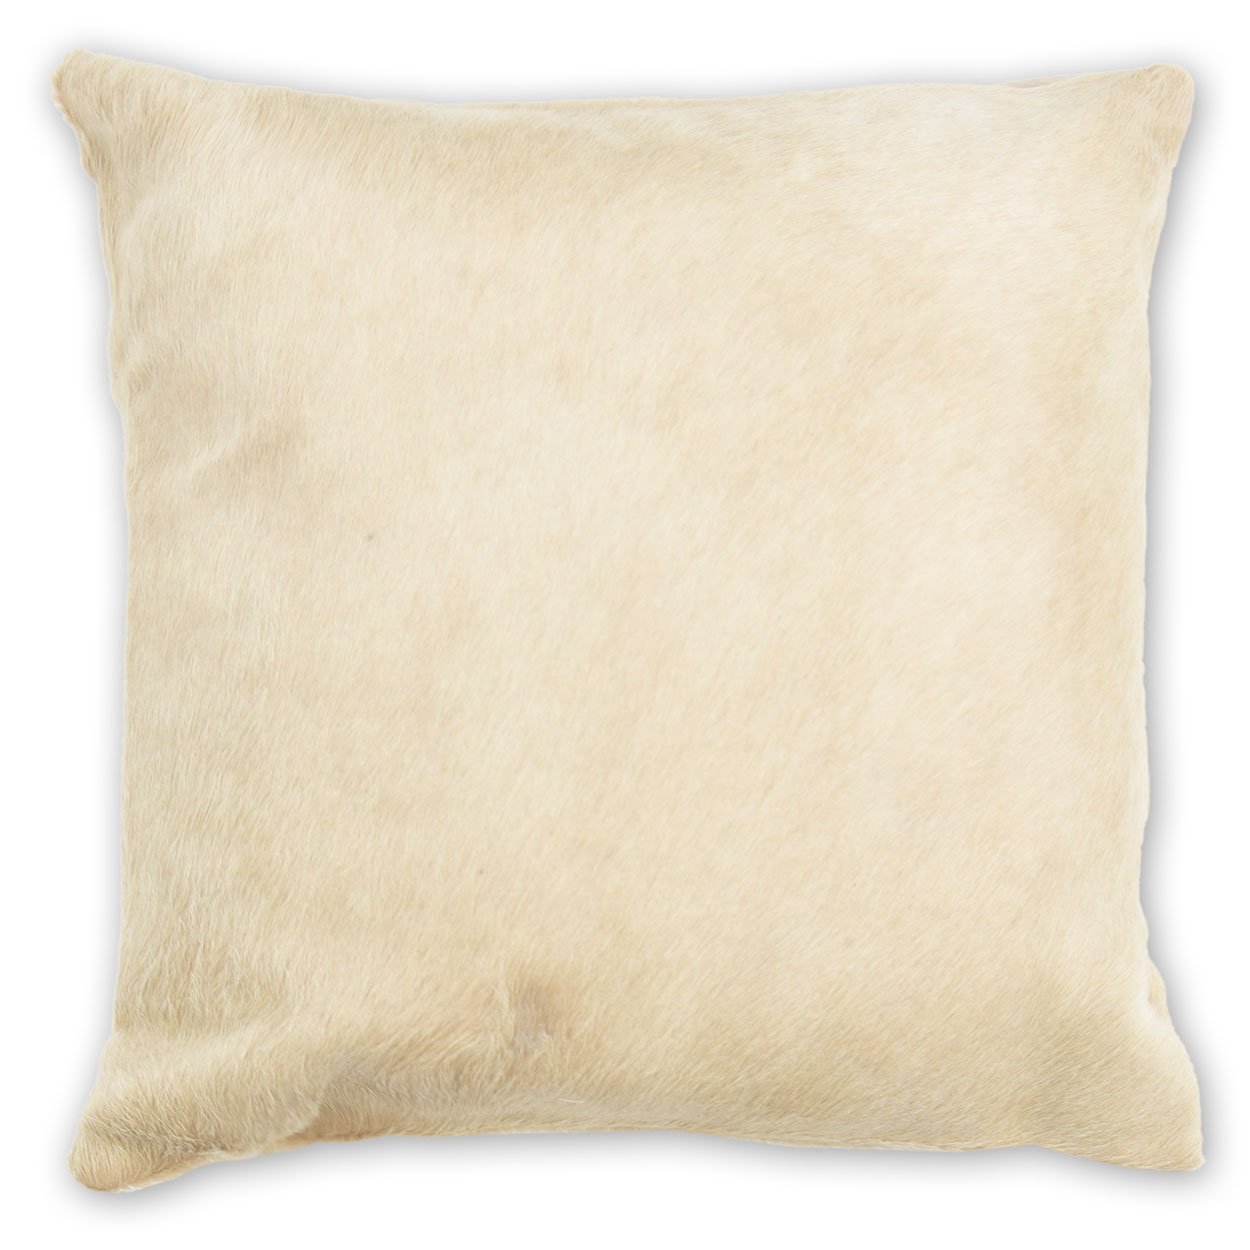 20in Premium Cowhide Pillow - Solid Palomino on Both Sides